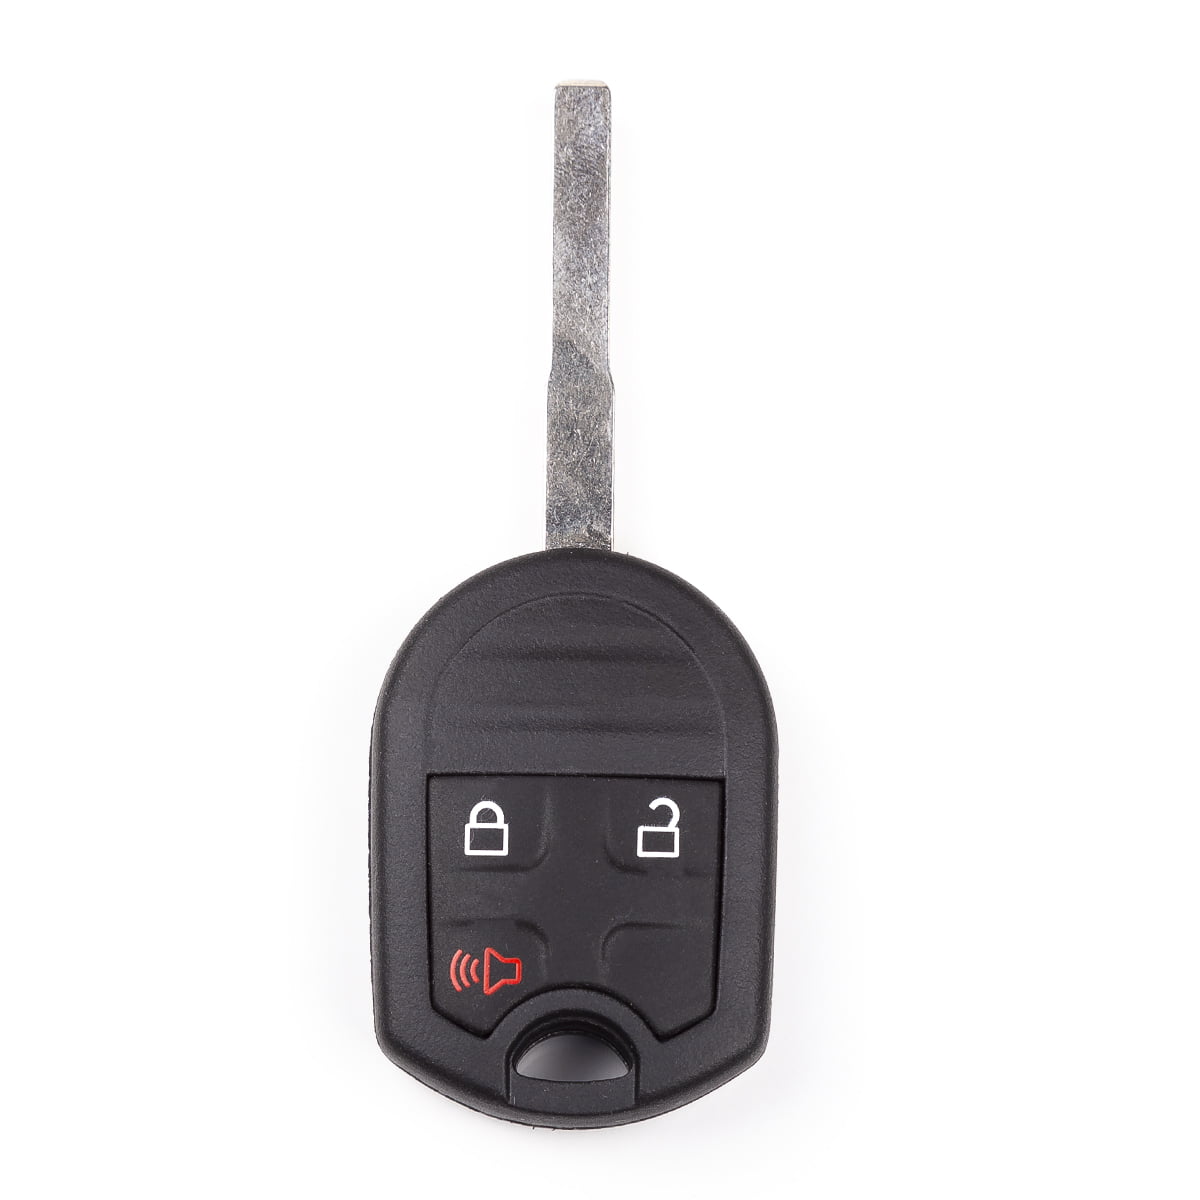 Replacement Key Fits 2011 2012 2013 2014 2015 Ford Fiesta Regular Ignition